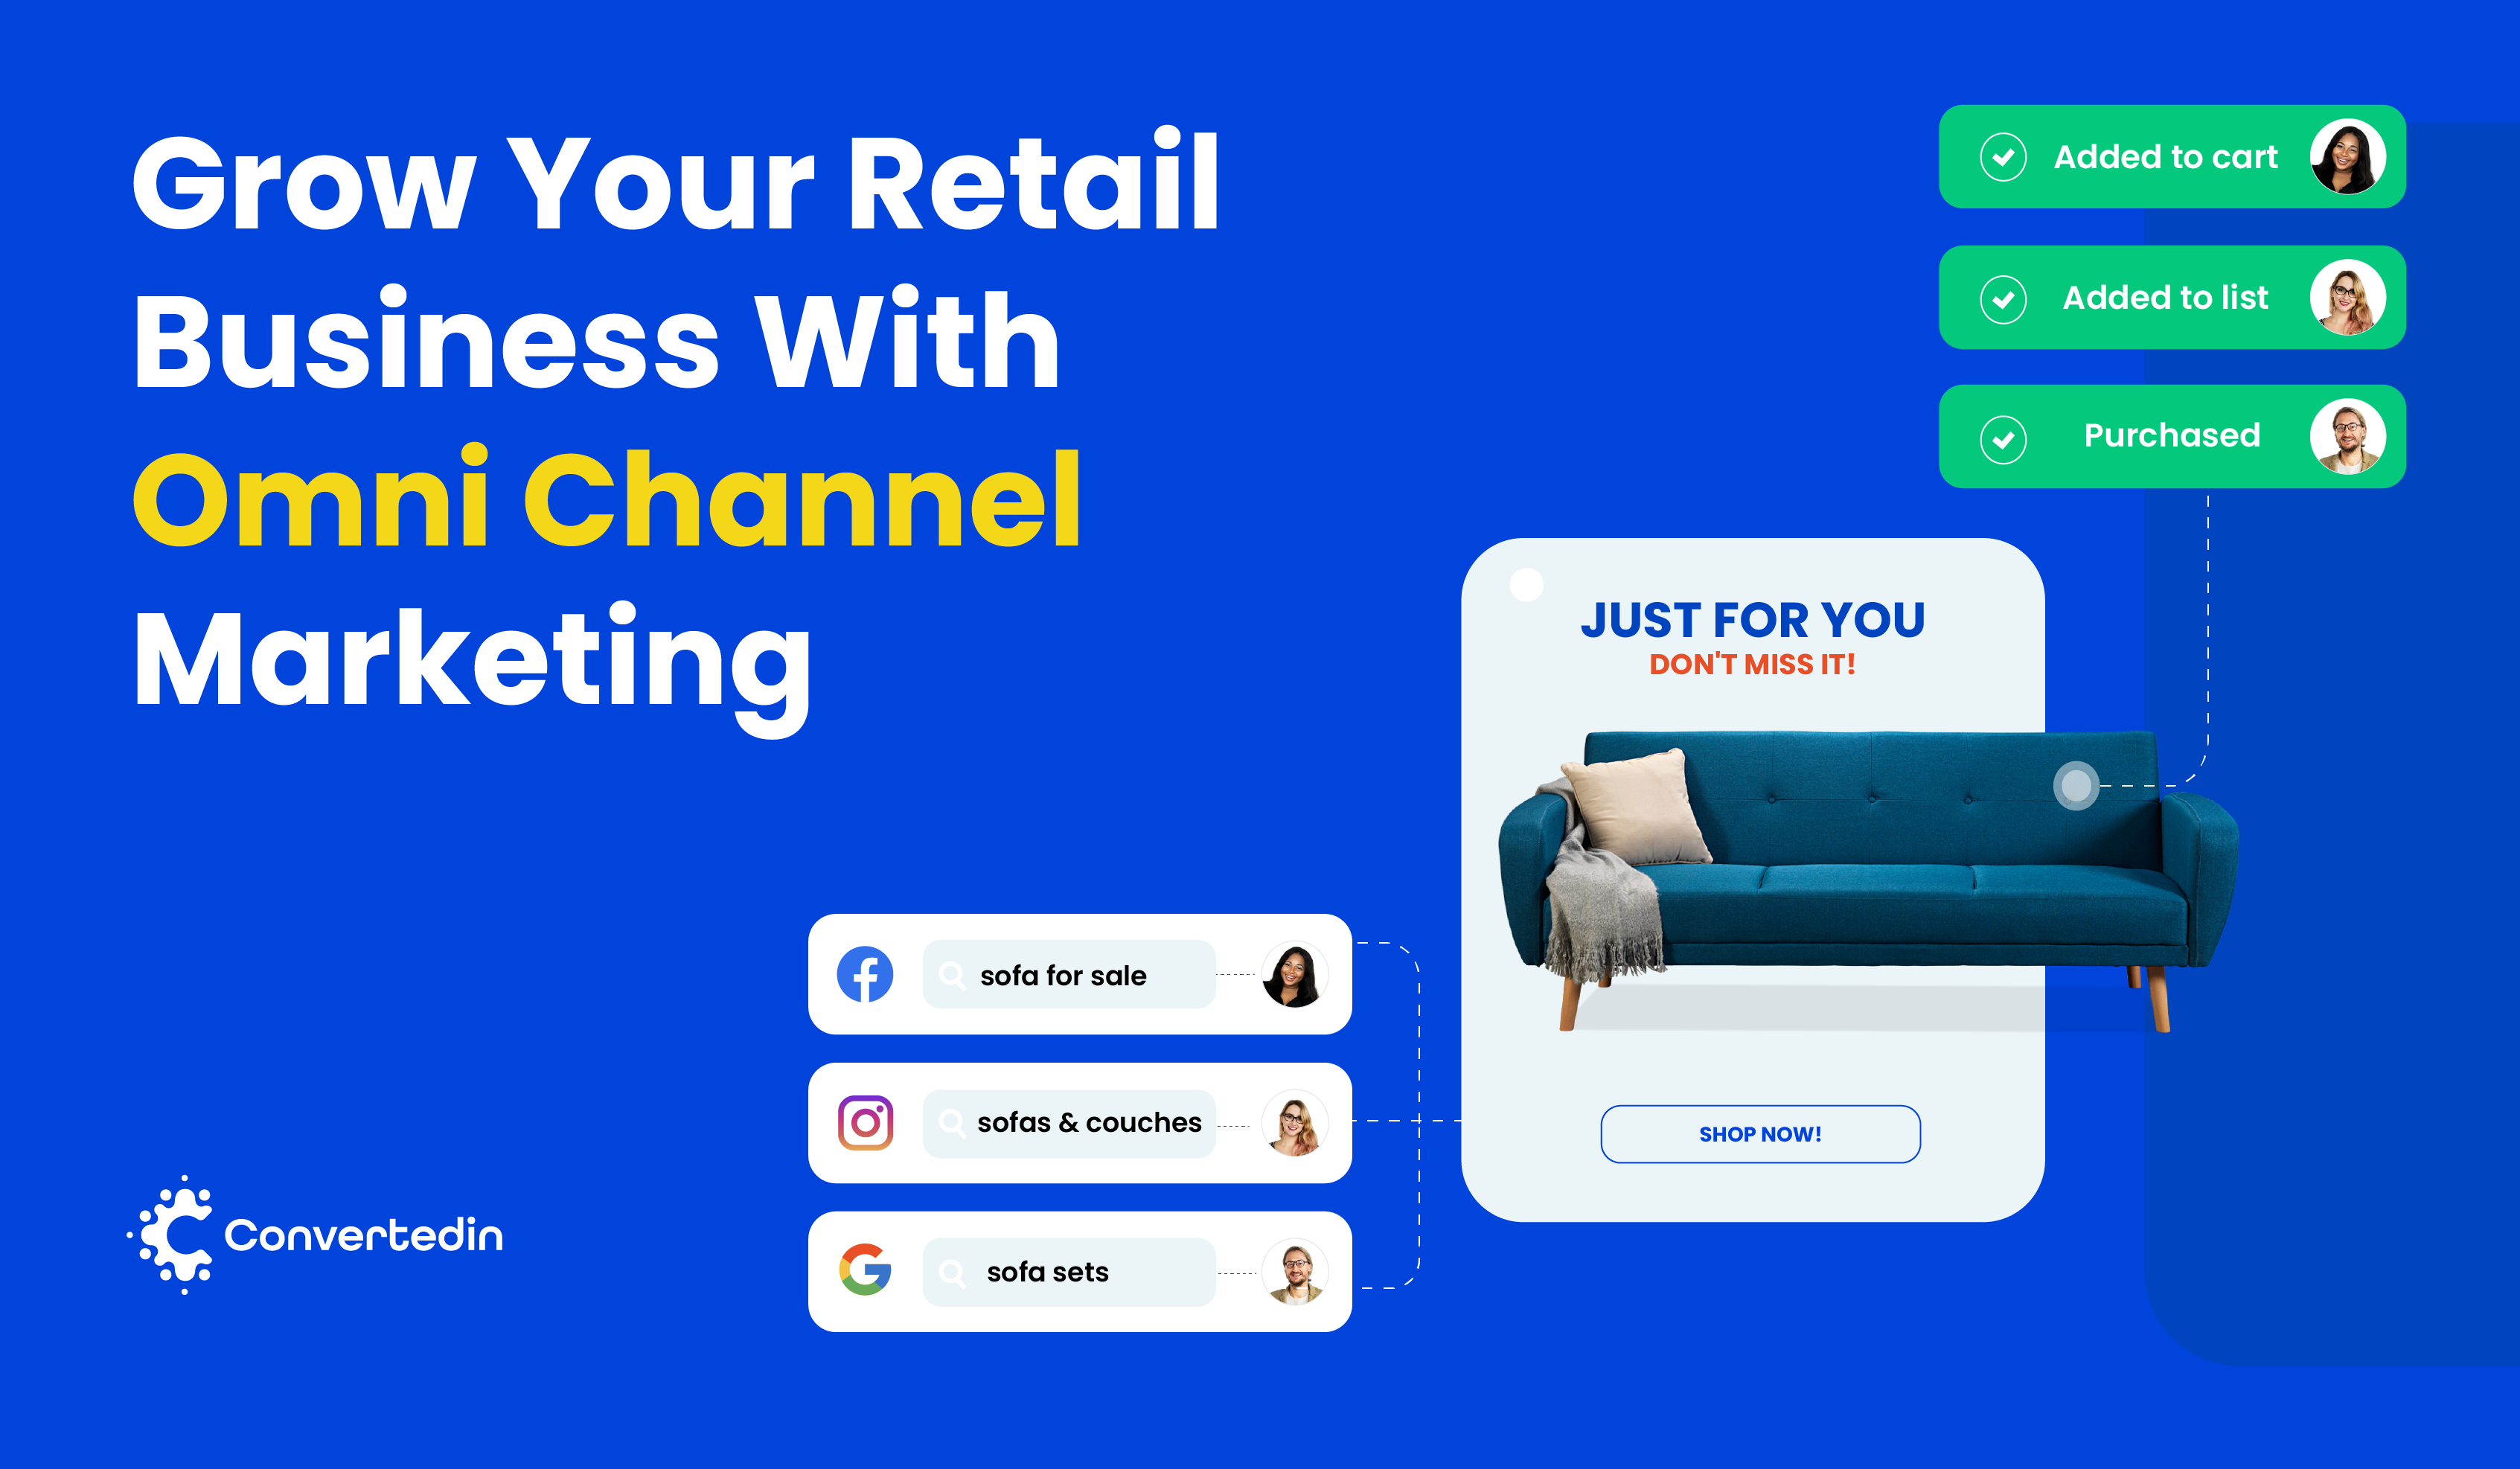 Grow Your Retail Business With Omni Channel Marketing